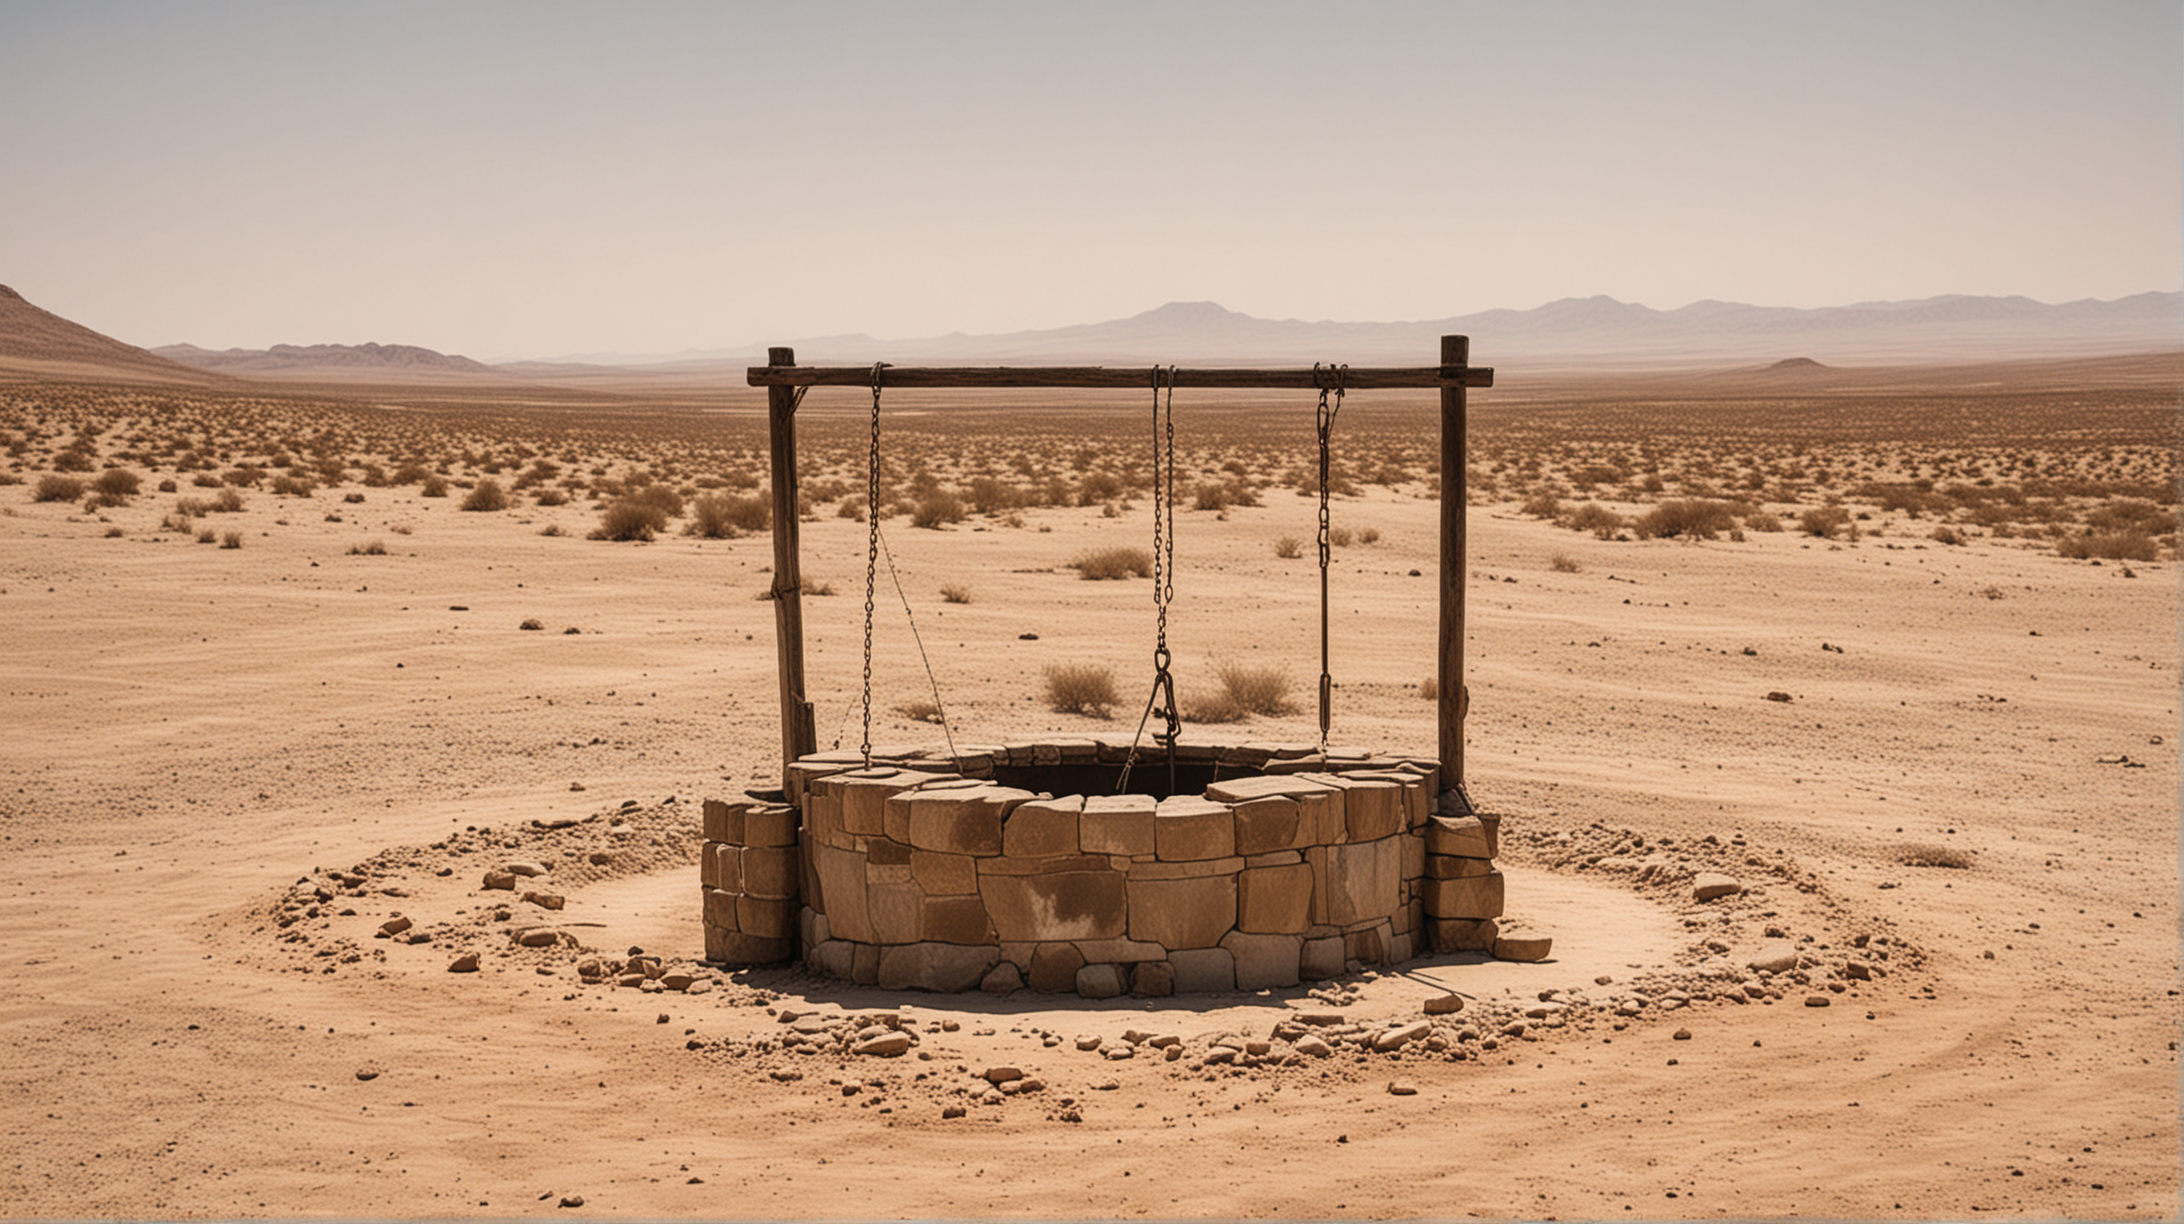 Desolate Desert Landscape with Lone Well